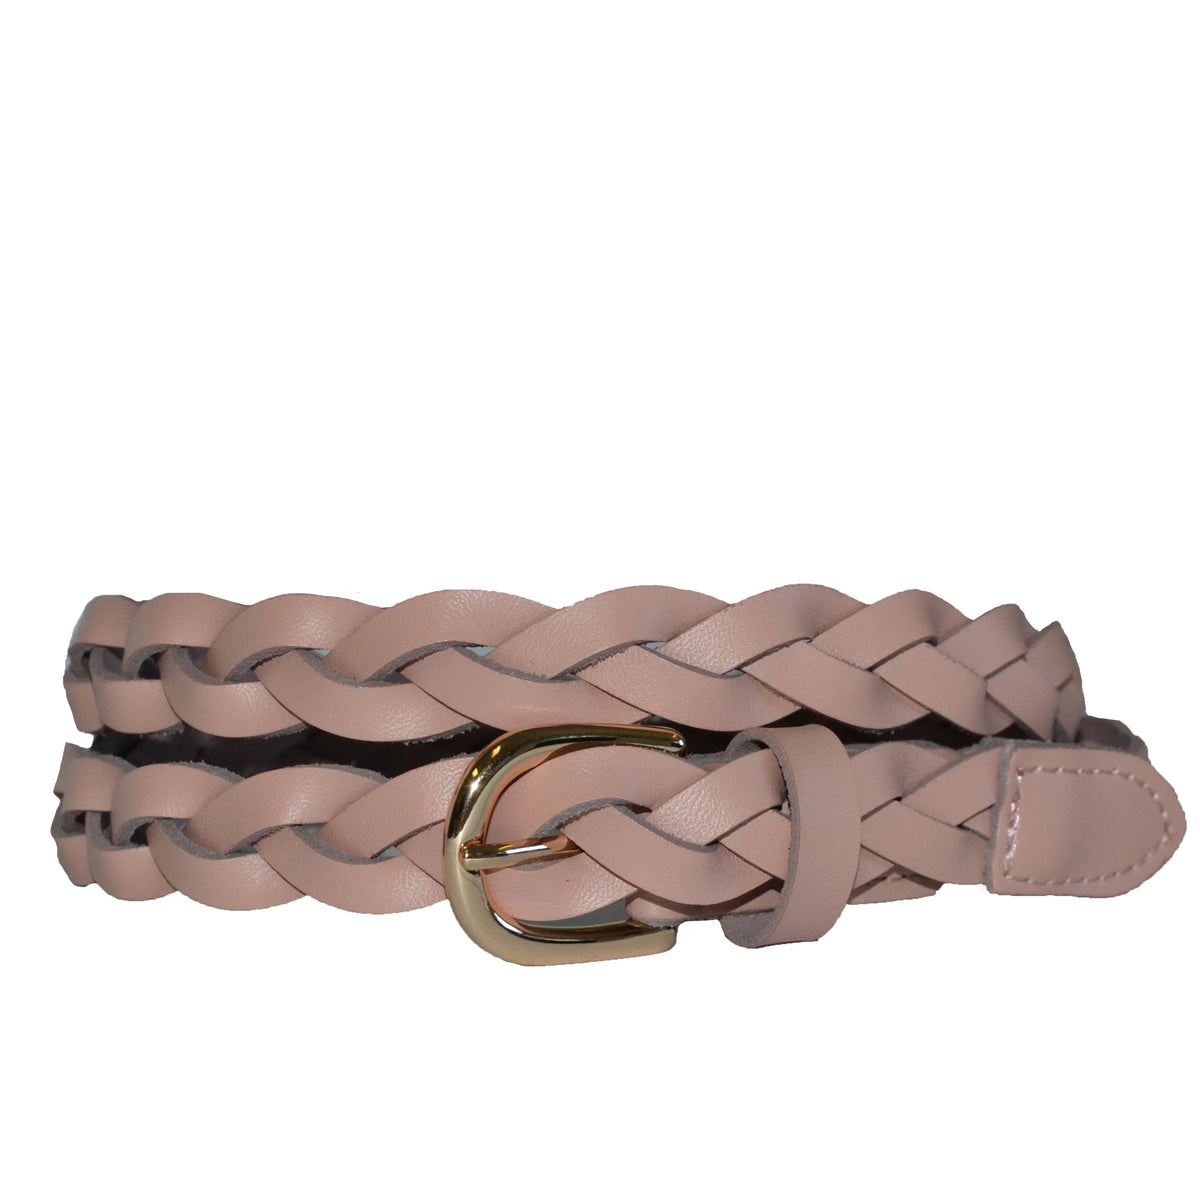 WAVERLY - Blush Pink Skinny Leather Plaited Belt with Gold Buckle Belts Addison Road